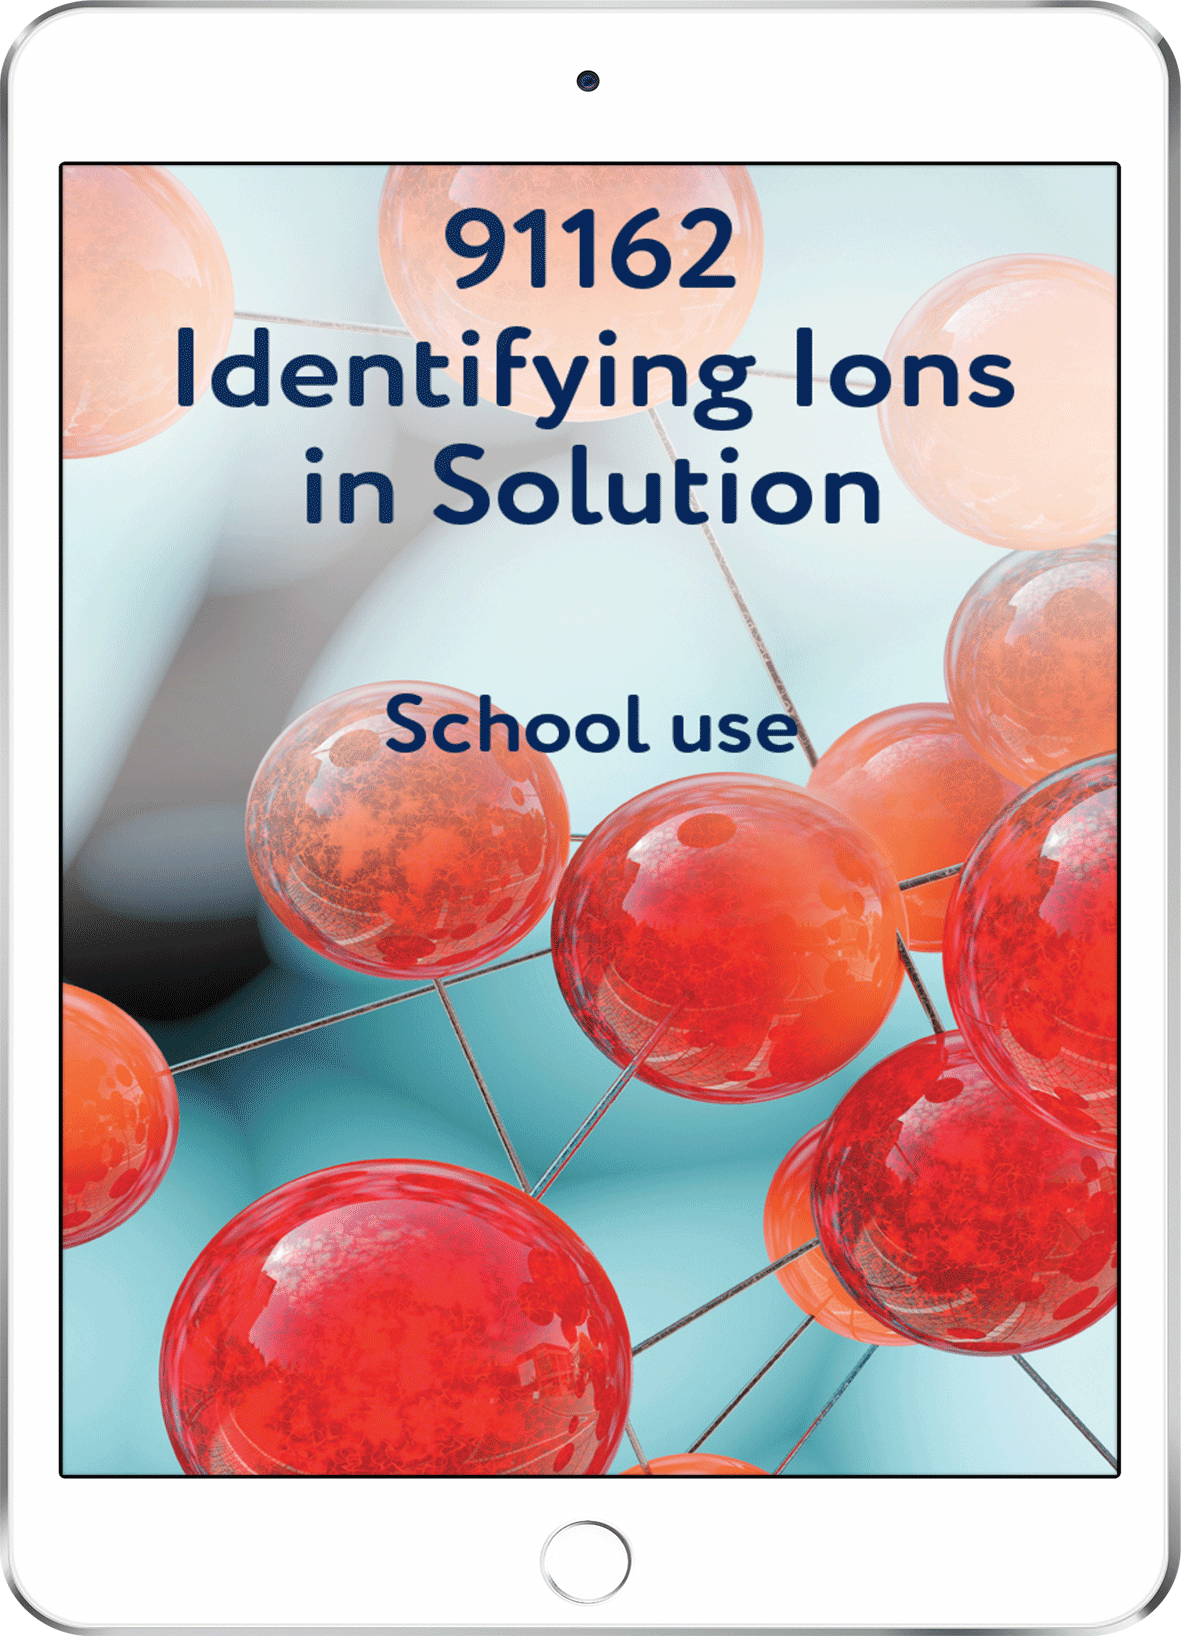 91162 Identifying Ions in Solution - School Use